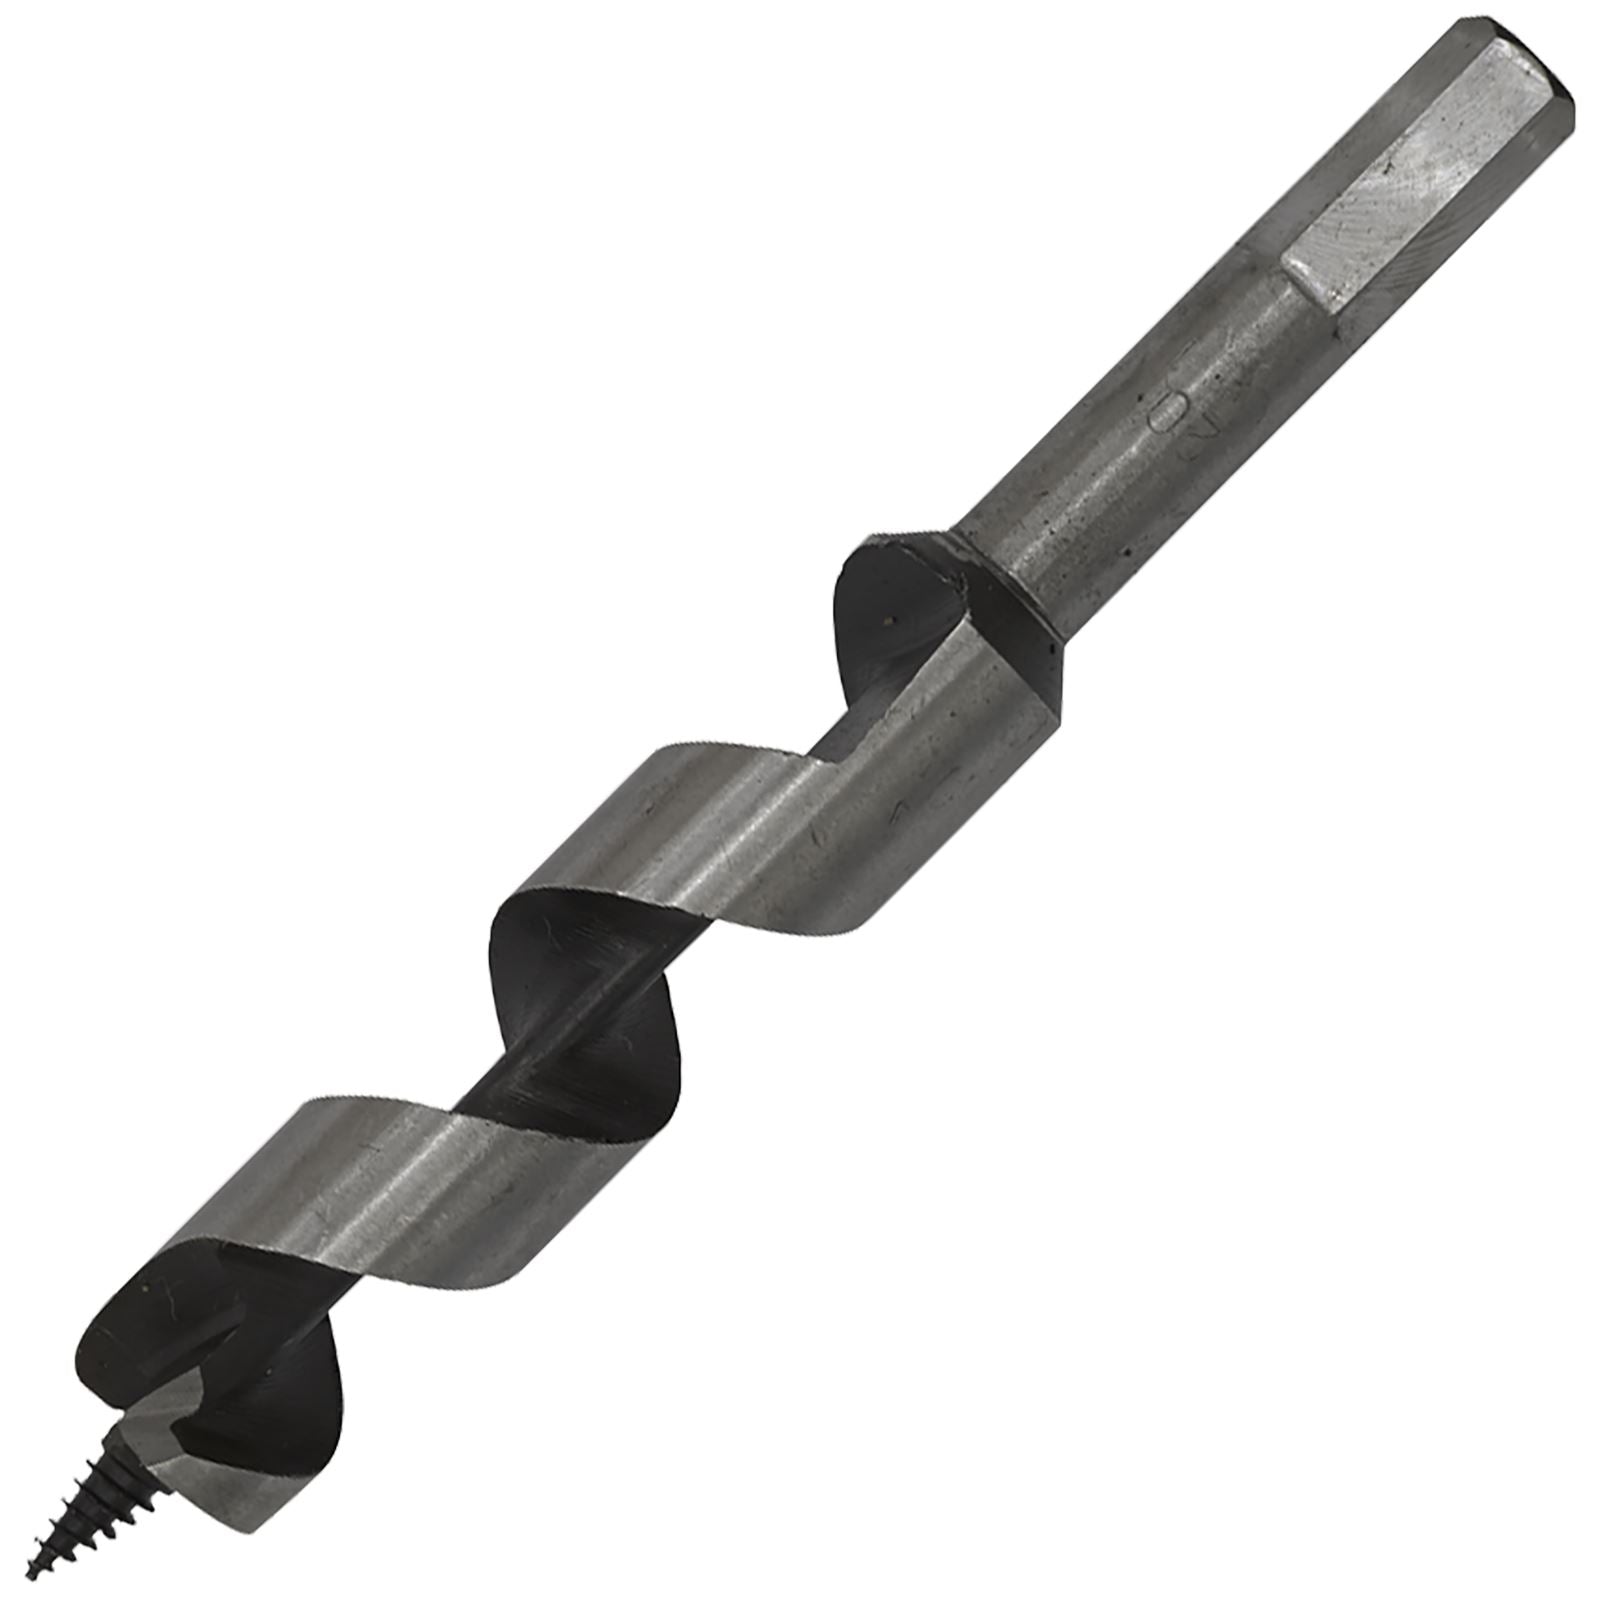 Worksafe by Sealey Auger Wood Drill Bit 20mm x 155mm